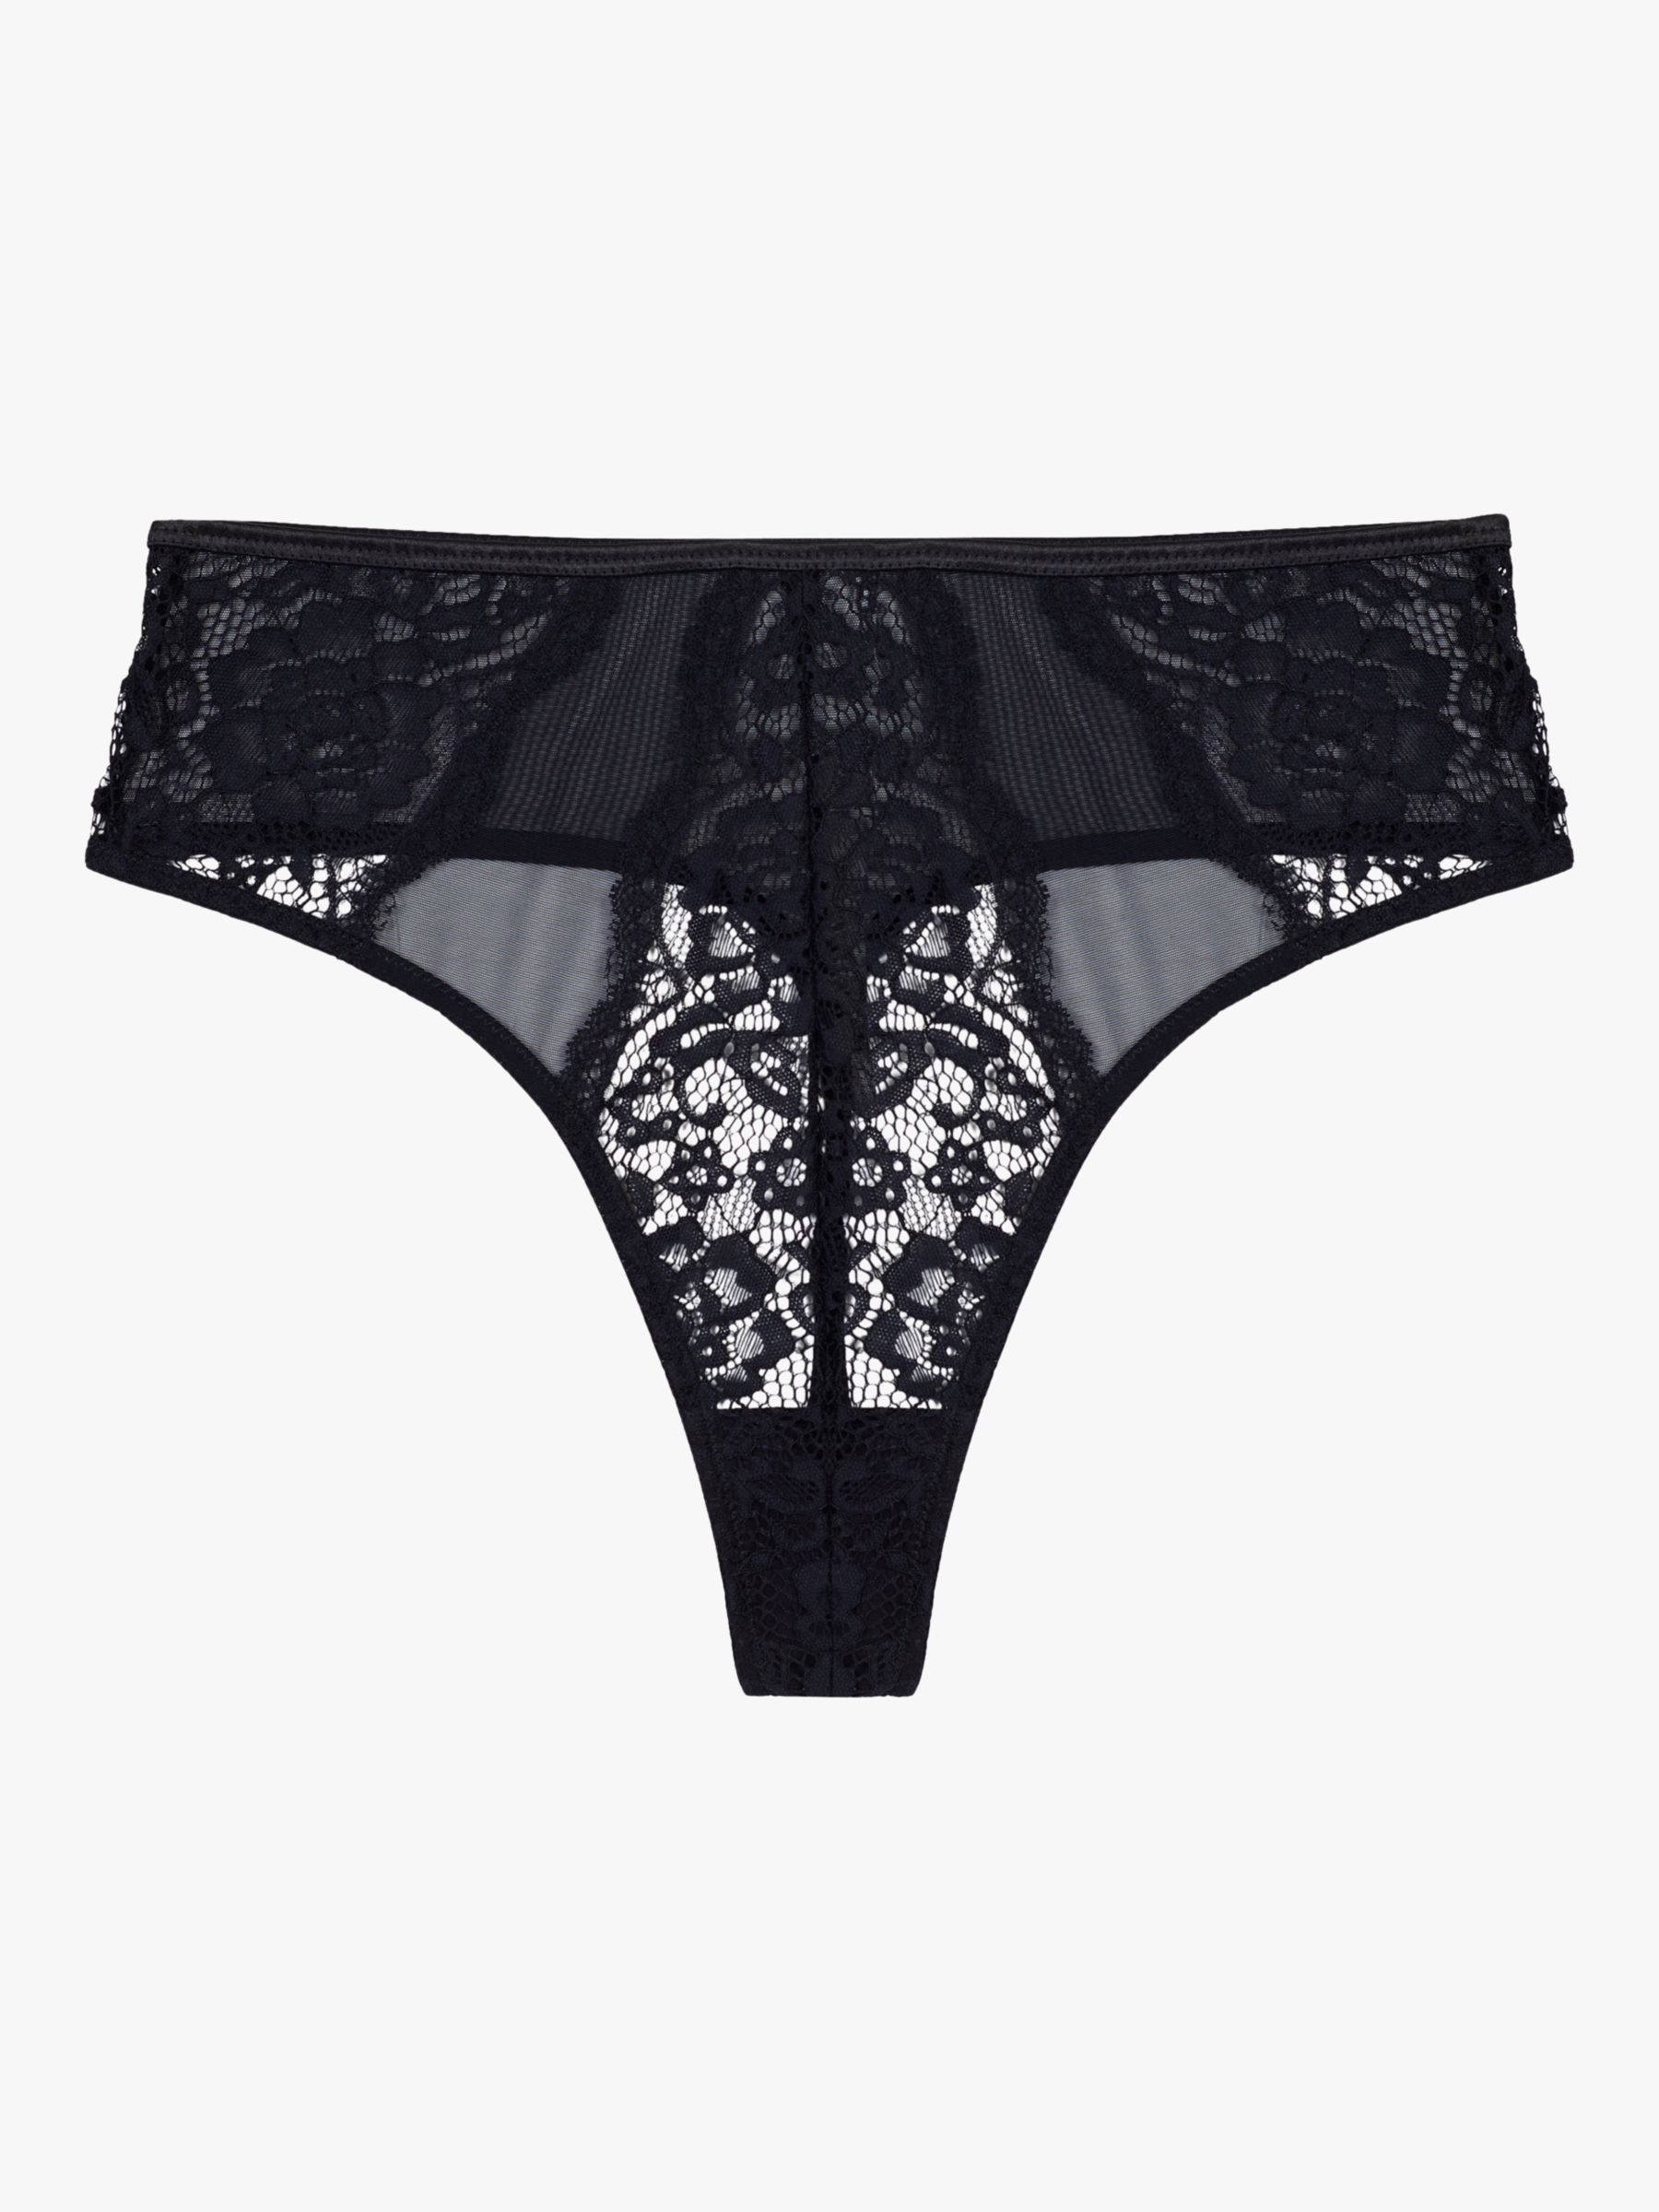 Felicity Hayward x Playful Promises Kay Lace String Knickers, Black at ...